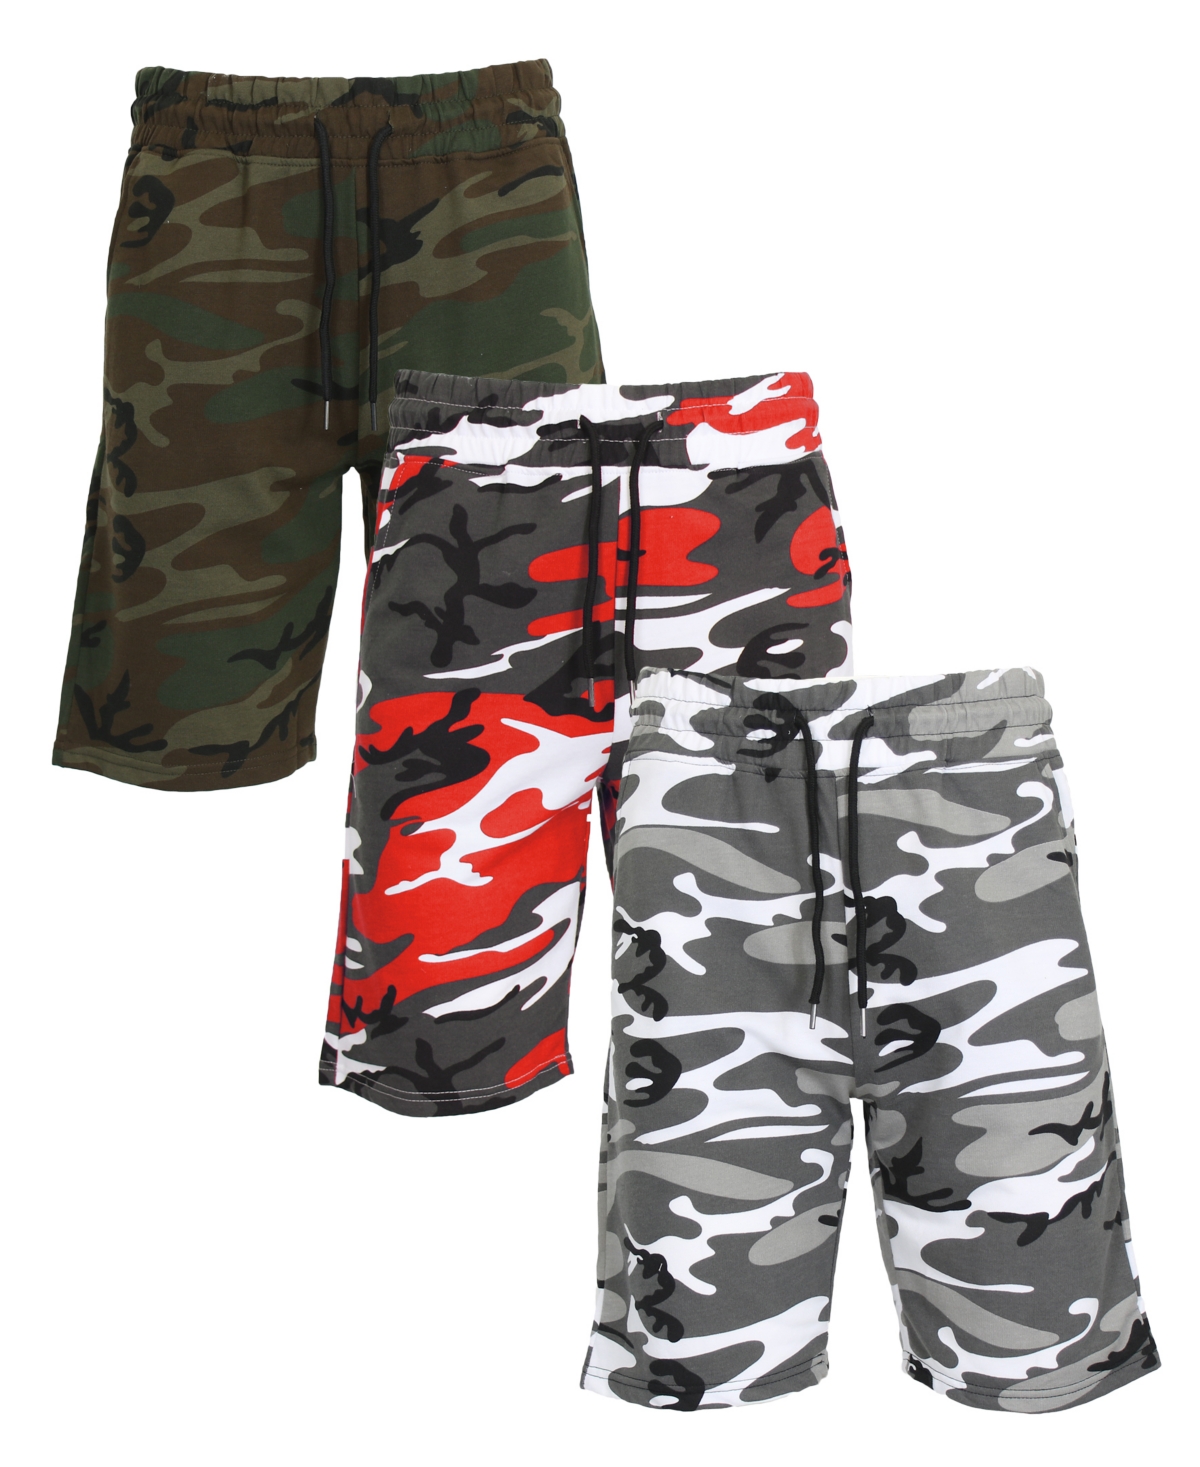 Galaxy By Harvic Men's Camo Printed French Terry Shorts, Pack Of 3 In Woodland Camo-red Camo-urban Camo